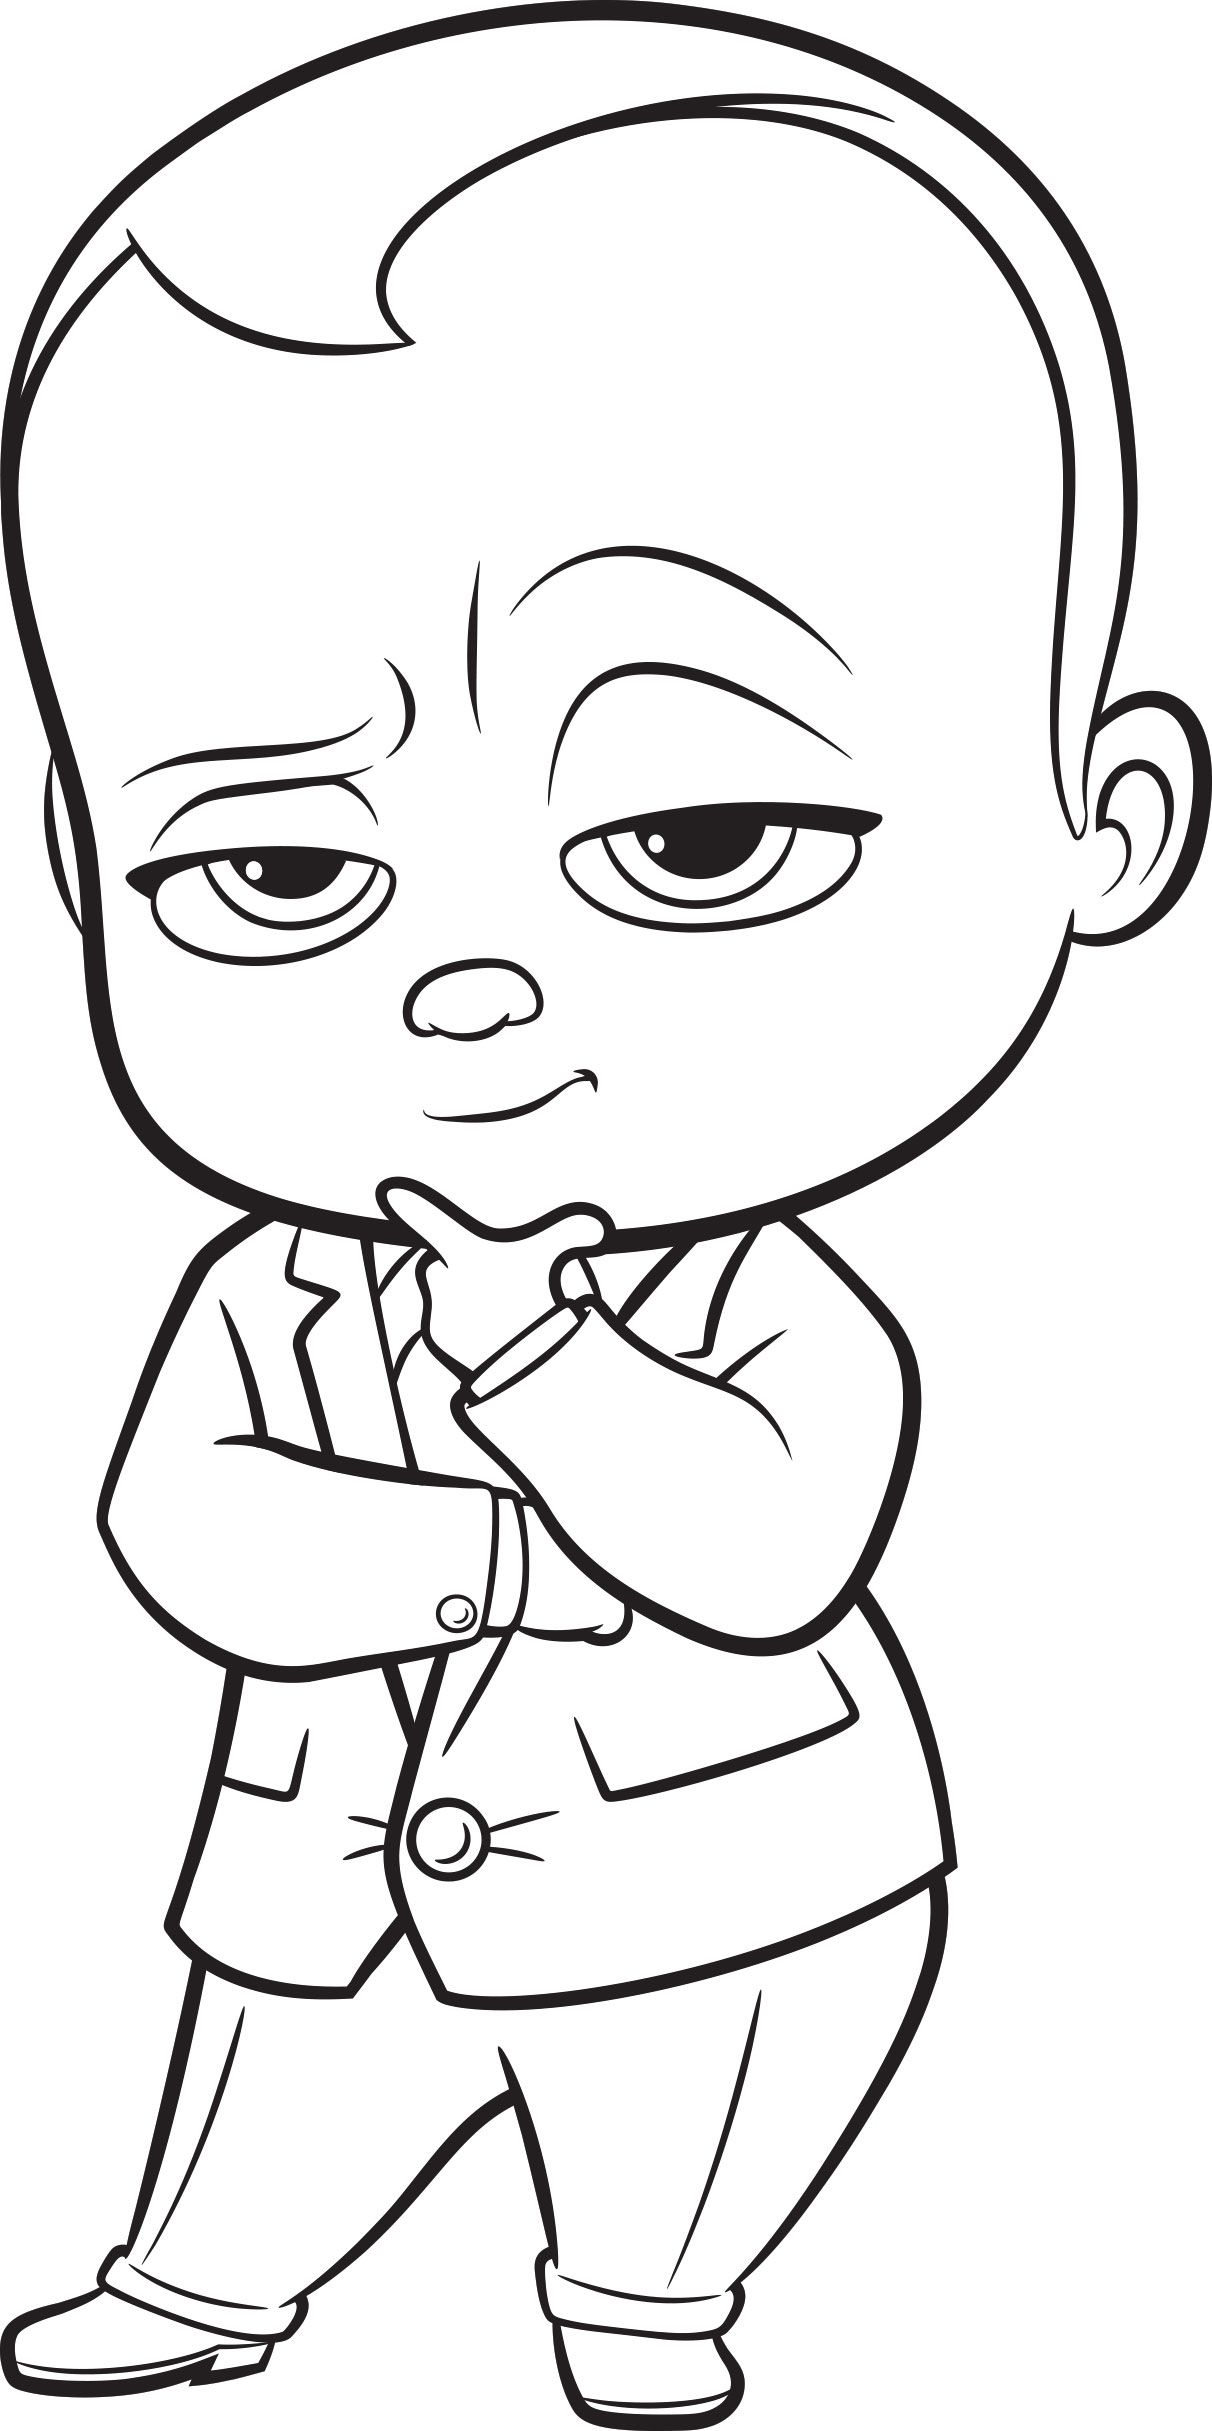 The Boss Baby Colouring Coloring Pages   Coloring Cool